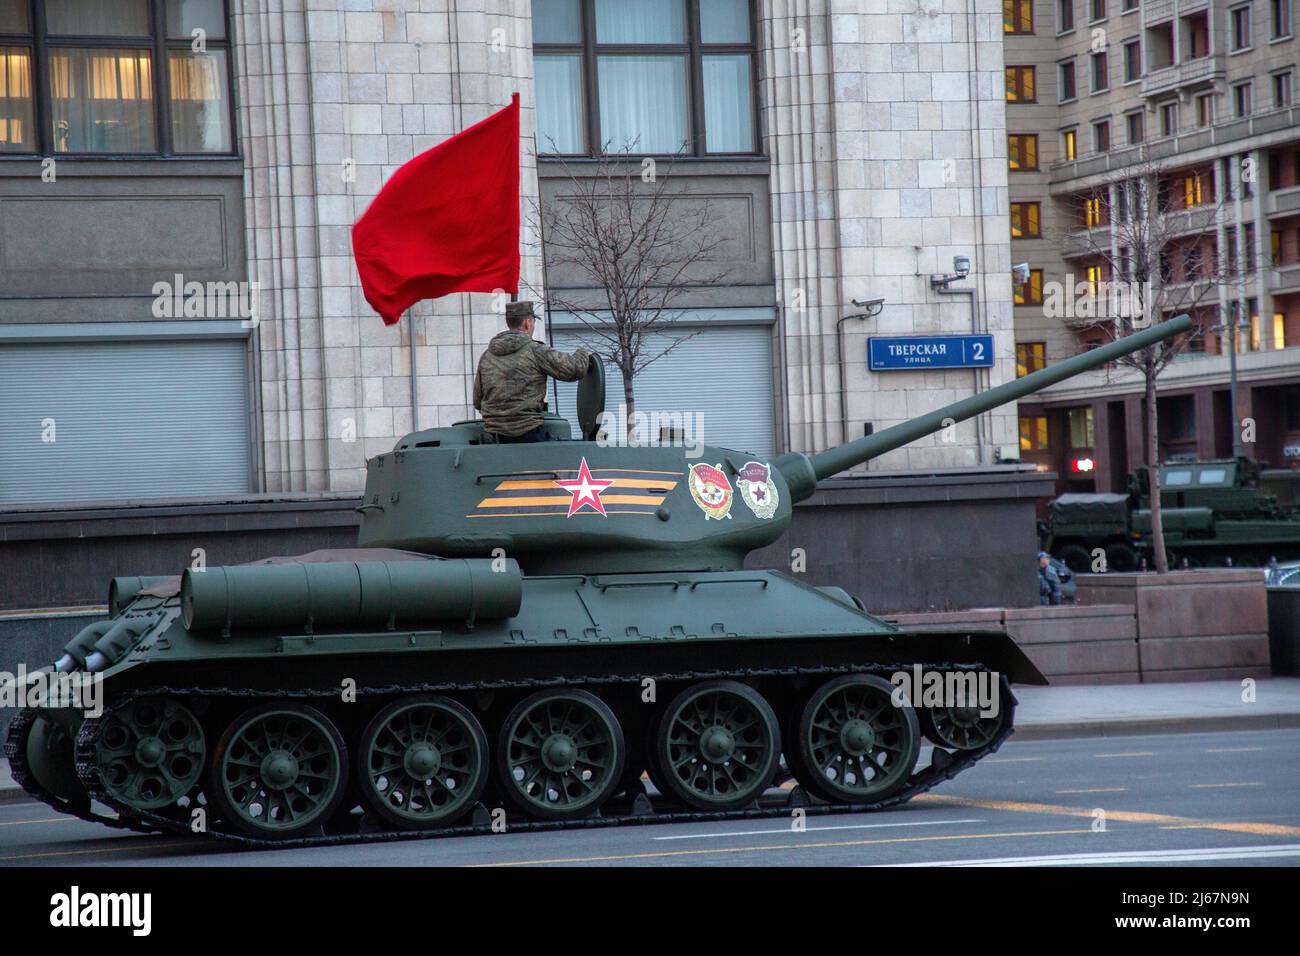 Moscow, Russia. 28th April, 2022. A T-34-85 tank is seen in Tverskaya Street as military hardware heads to Red Square for a rehearsal of the upcoming May 9 Victory Day parade marking the 77th anniversary of the victory over Nazi Germany in World War II. Credit: Nikolay Vinokurov/Alamy Live News Stock Photo